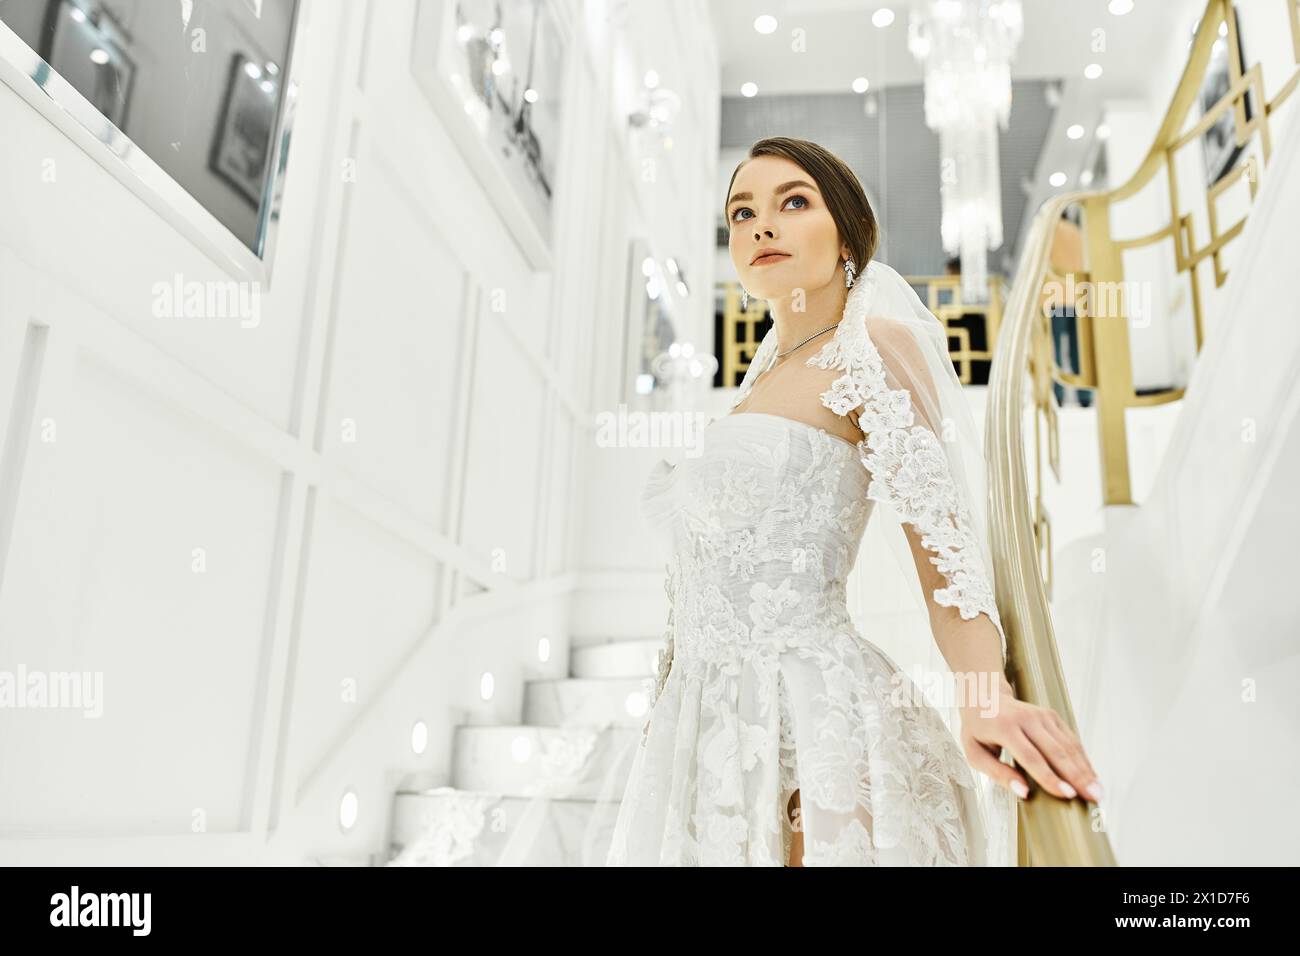 A young brunette bride in a wedding dress stands on a staircase in a bridal salon. Stock Photo